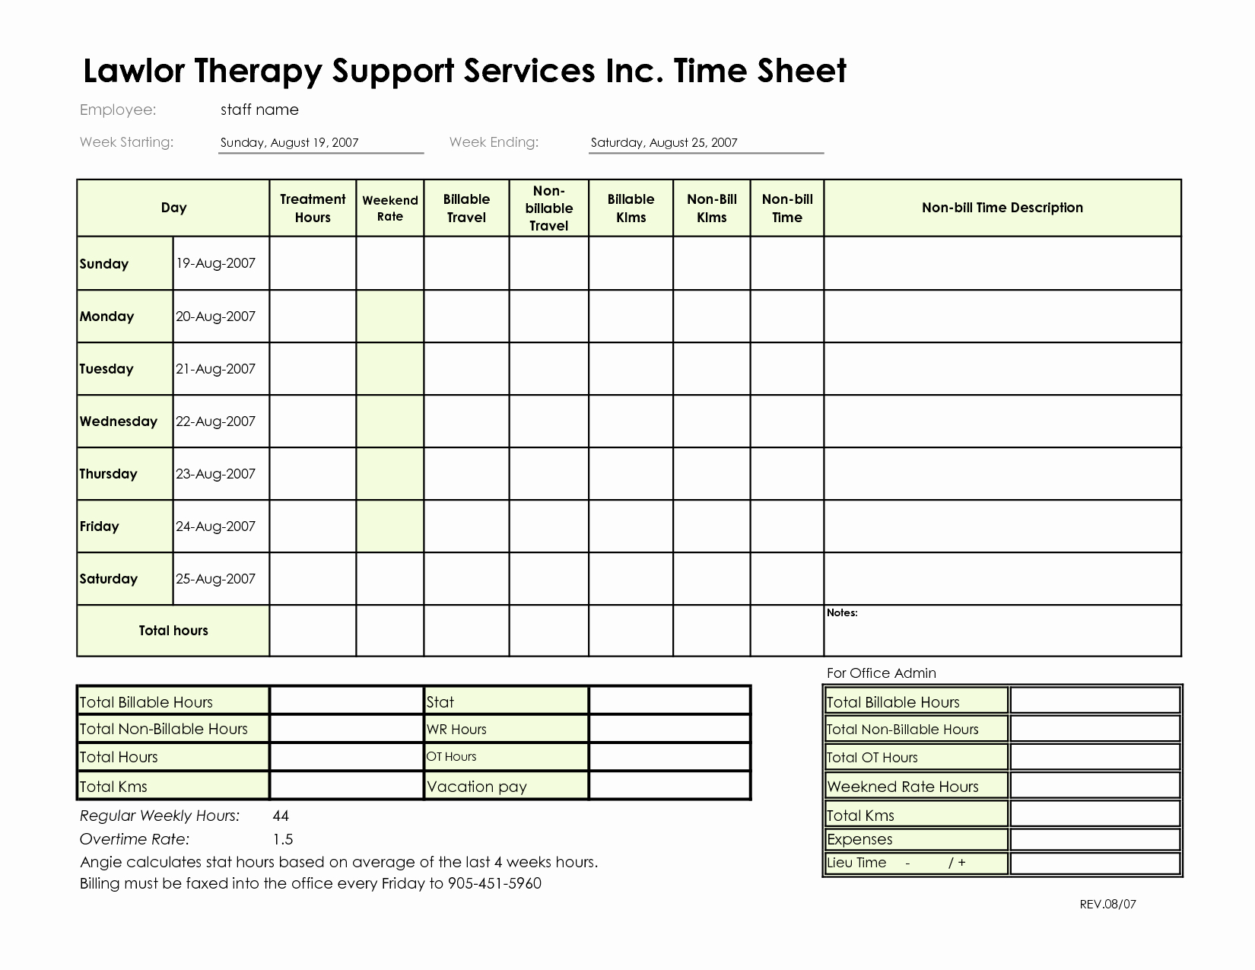 consultant-billable-hours-spreadsheet-spreadsheet-downloa-consultant-billable-hours-spreadsheet